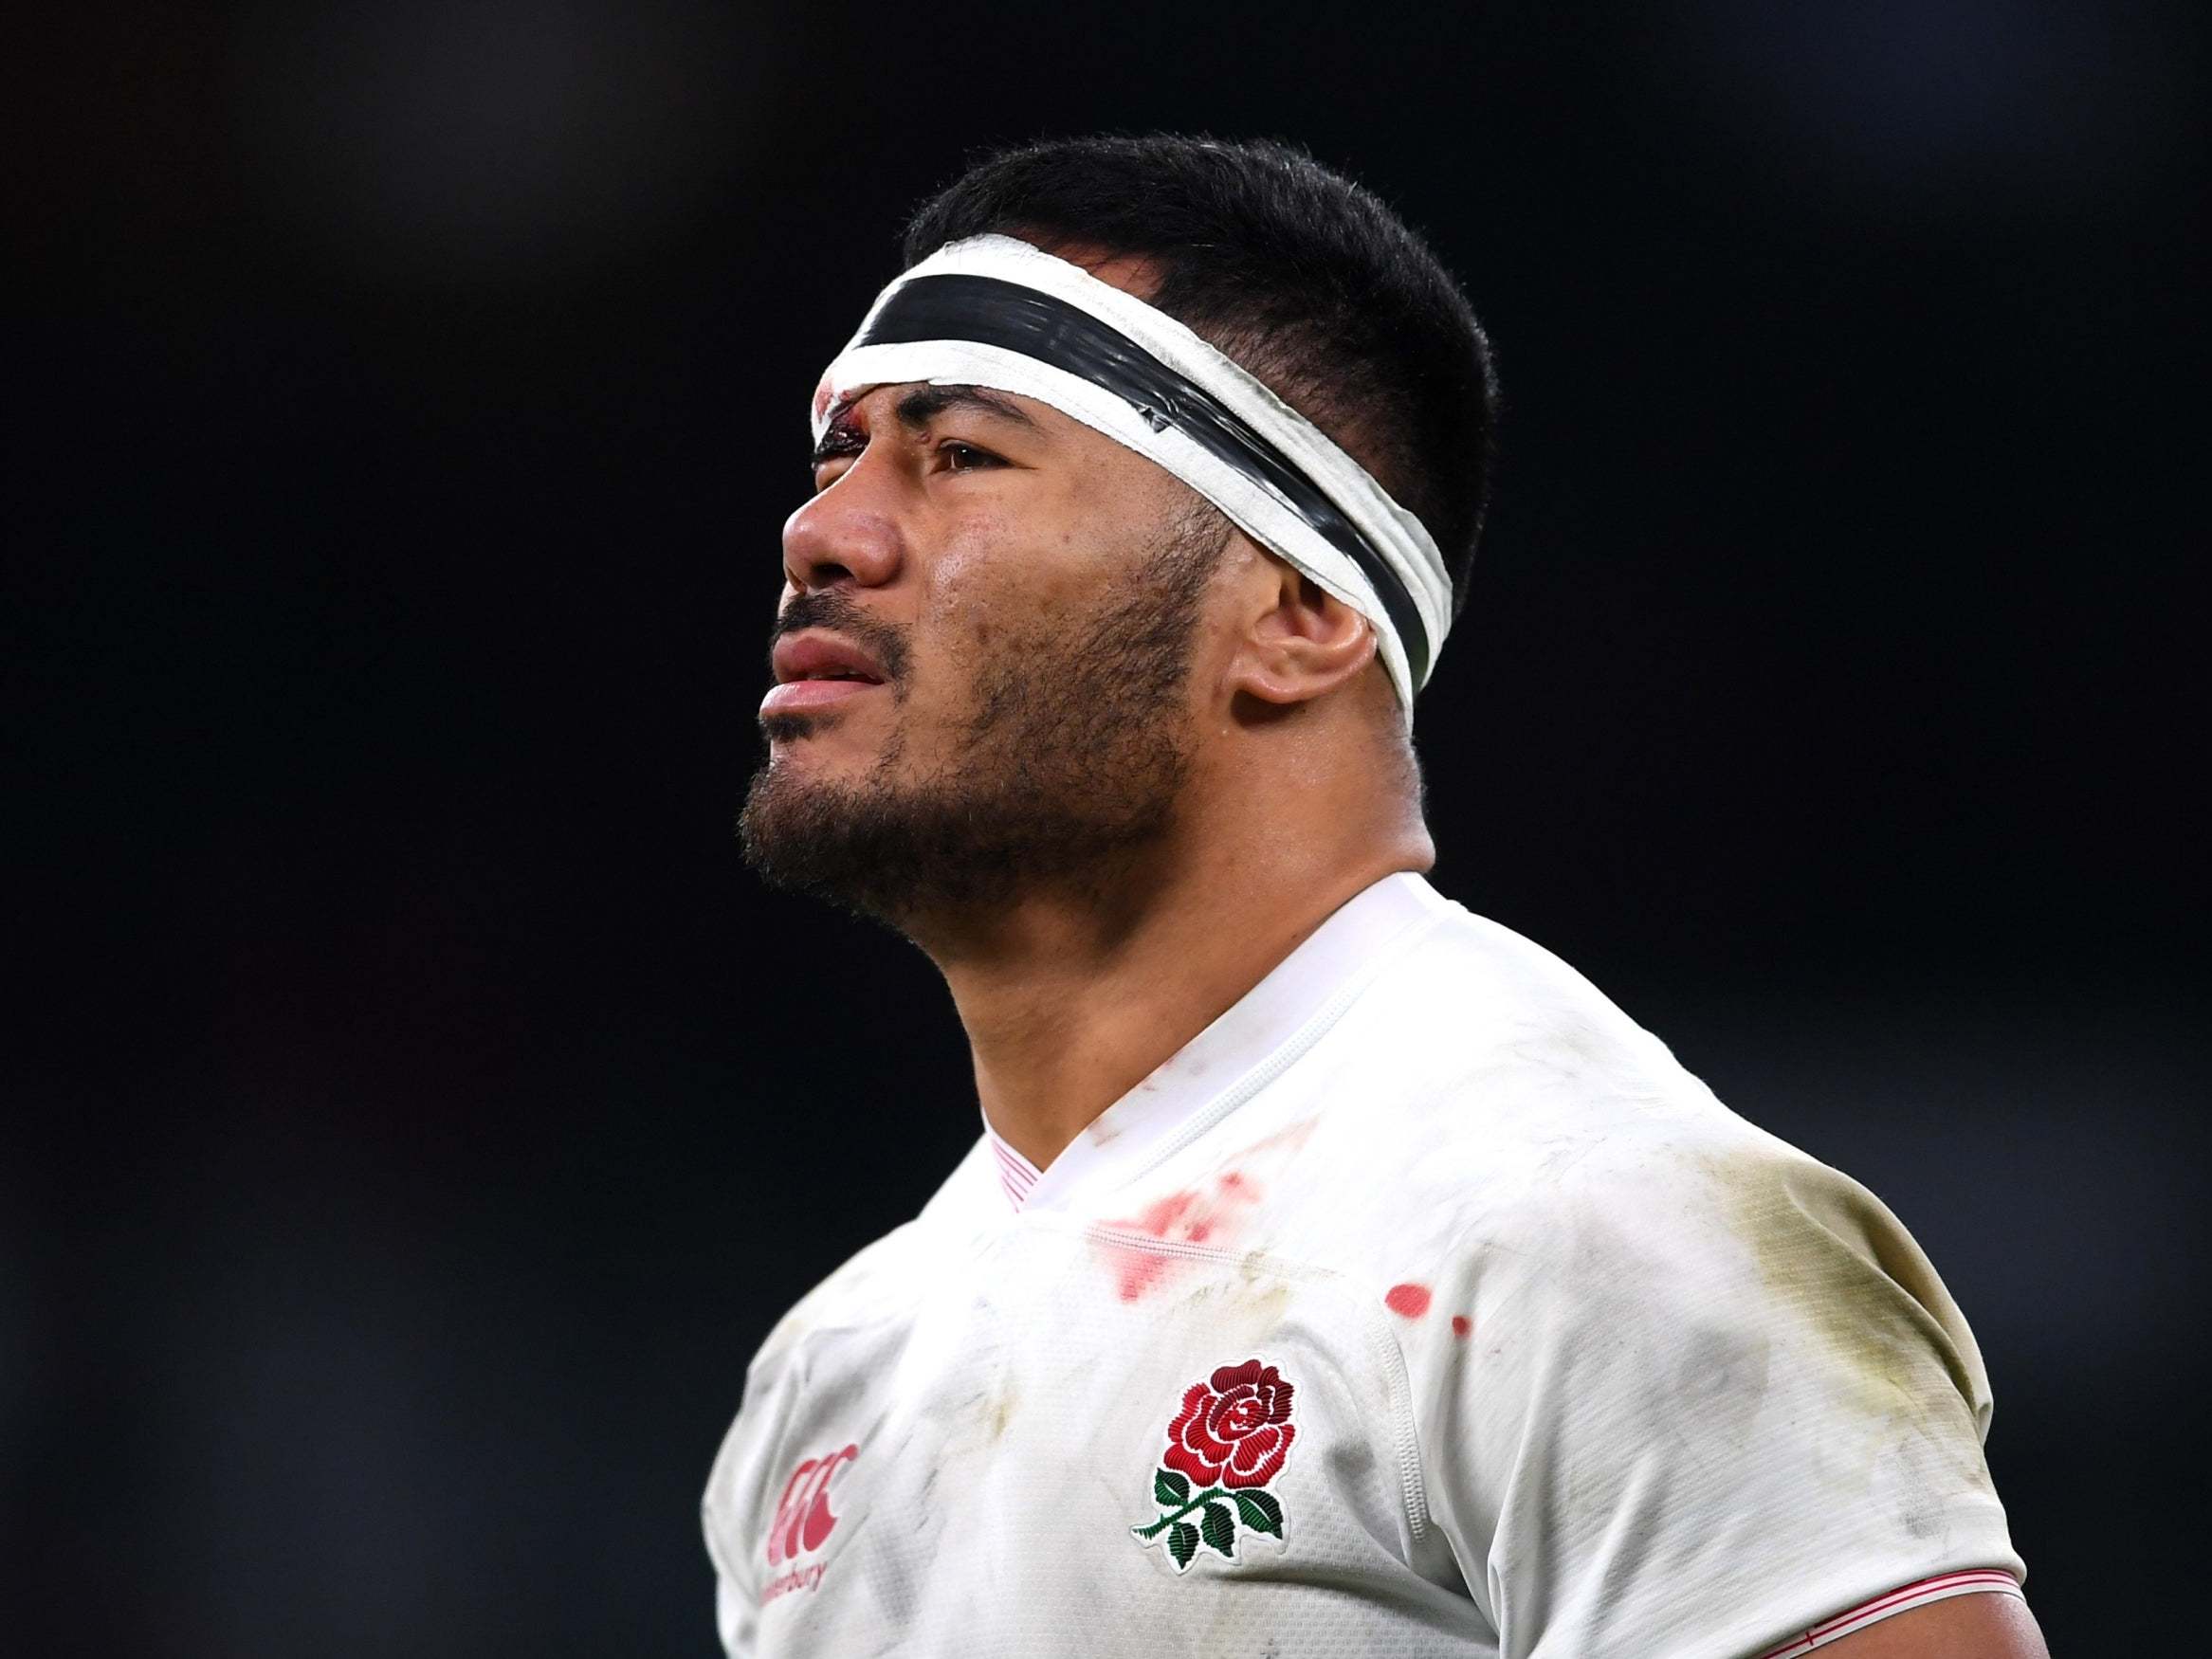 Manu Tuilagi has no qualms over red card but England's ill-discipline goes overlooked after second-half meltdown